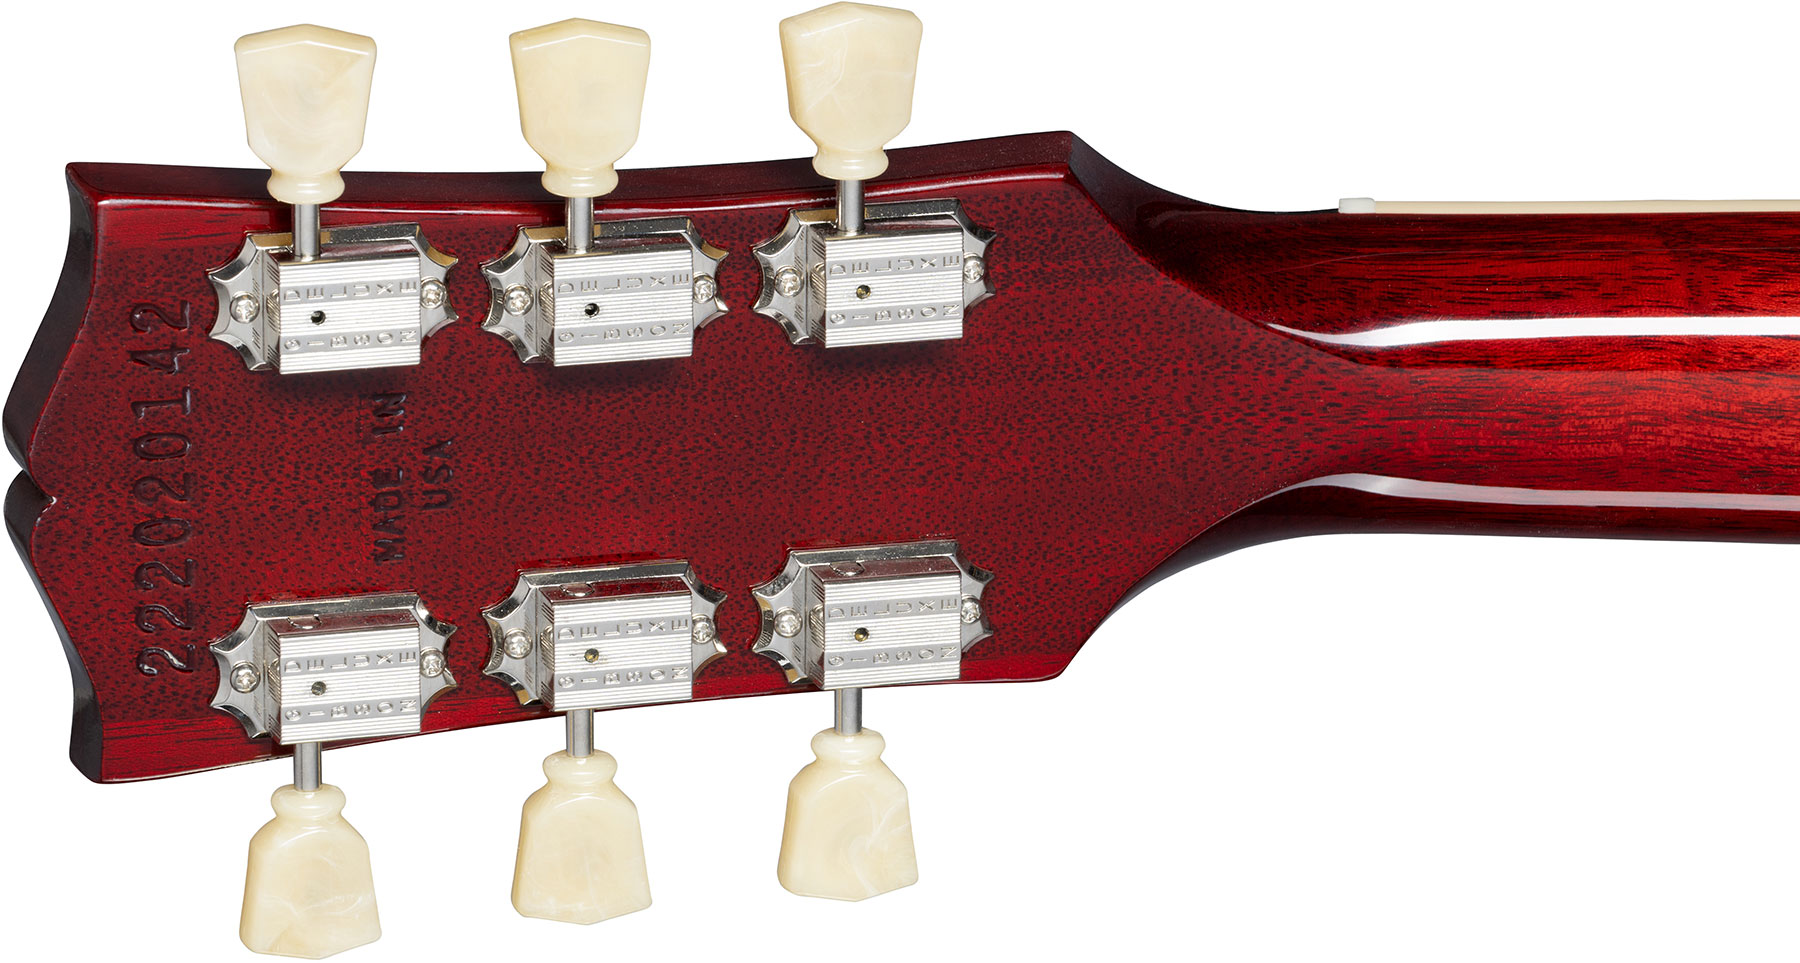 Gibson Les Paul Deluxe 70s Plain Top Original 2mh Ht Rw - Wine Red - Single cut electric guitar - Variation 4